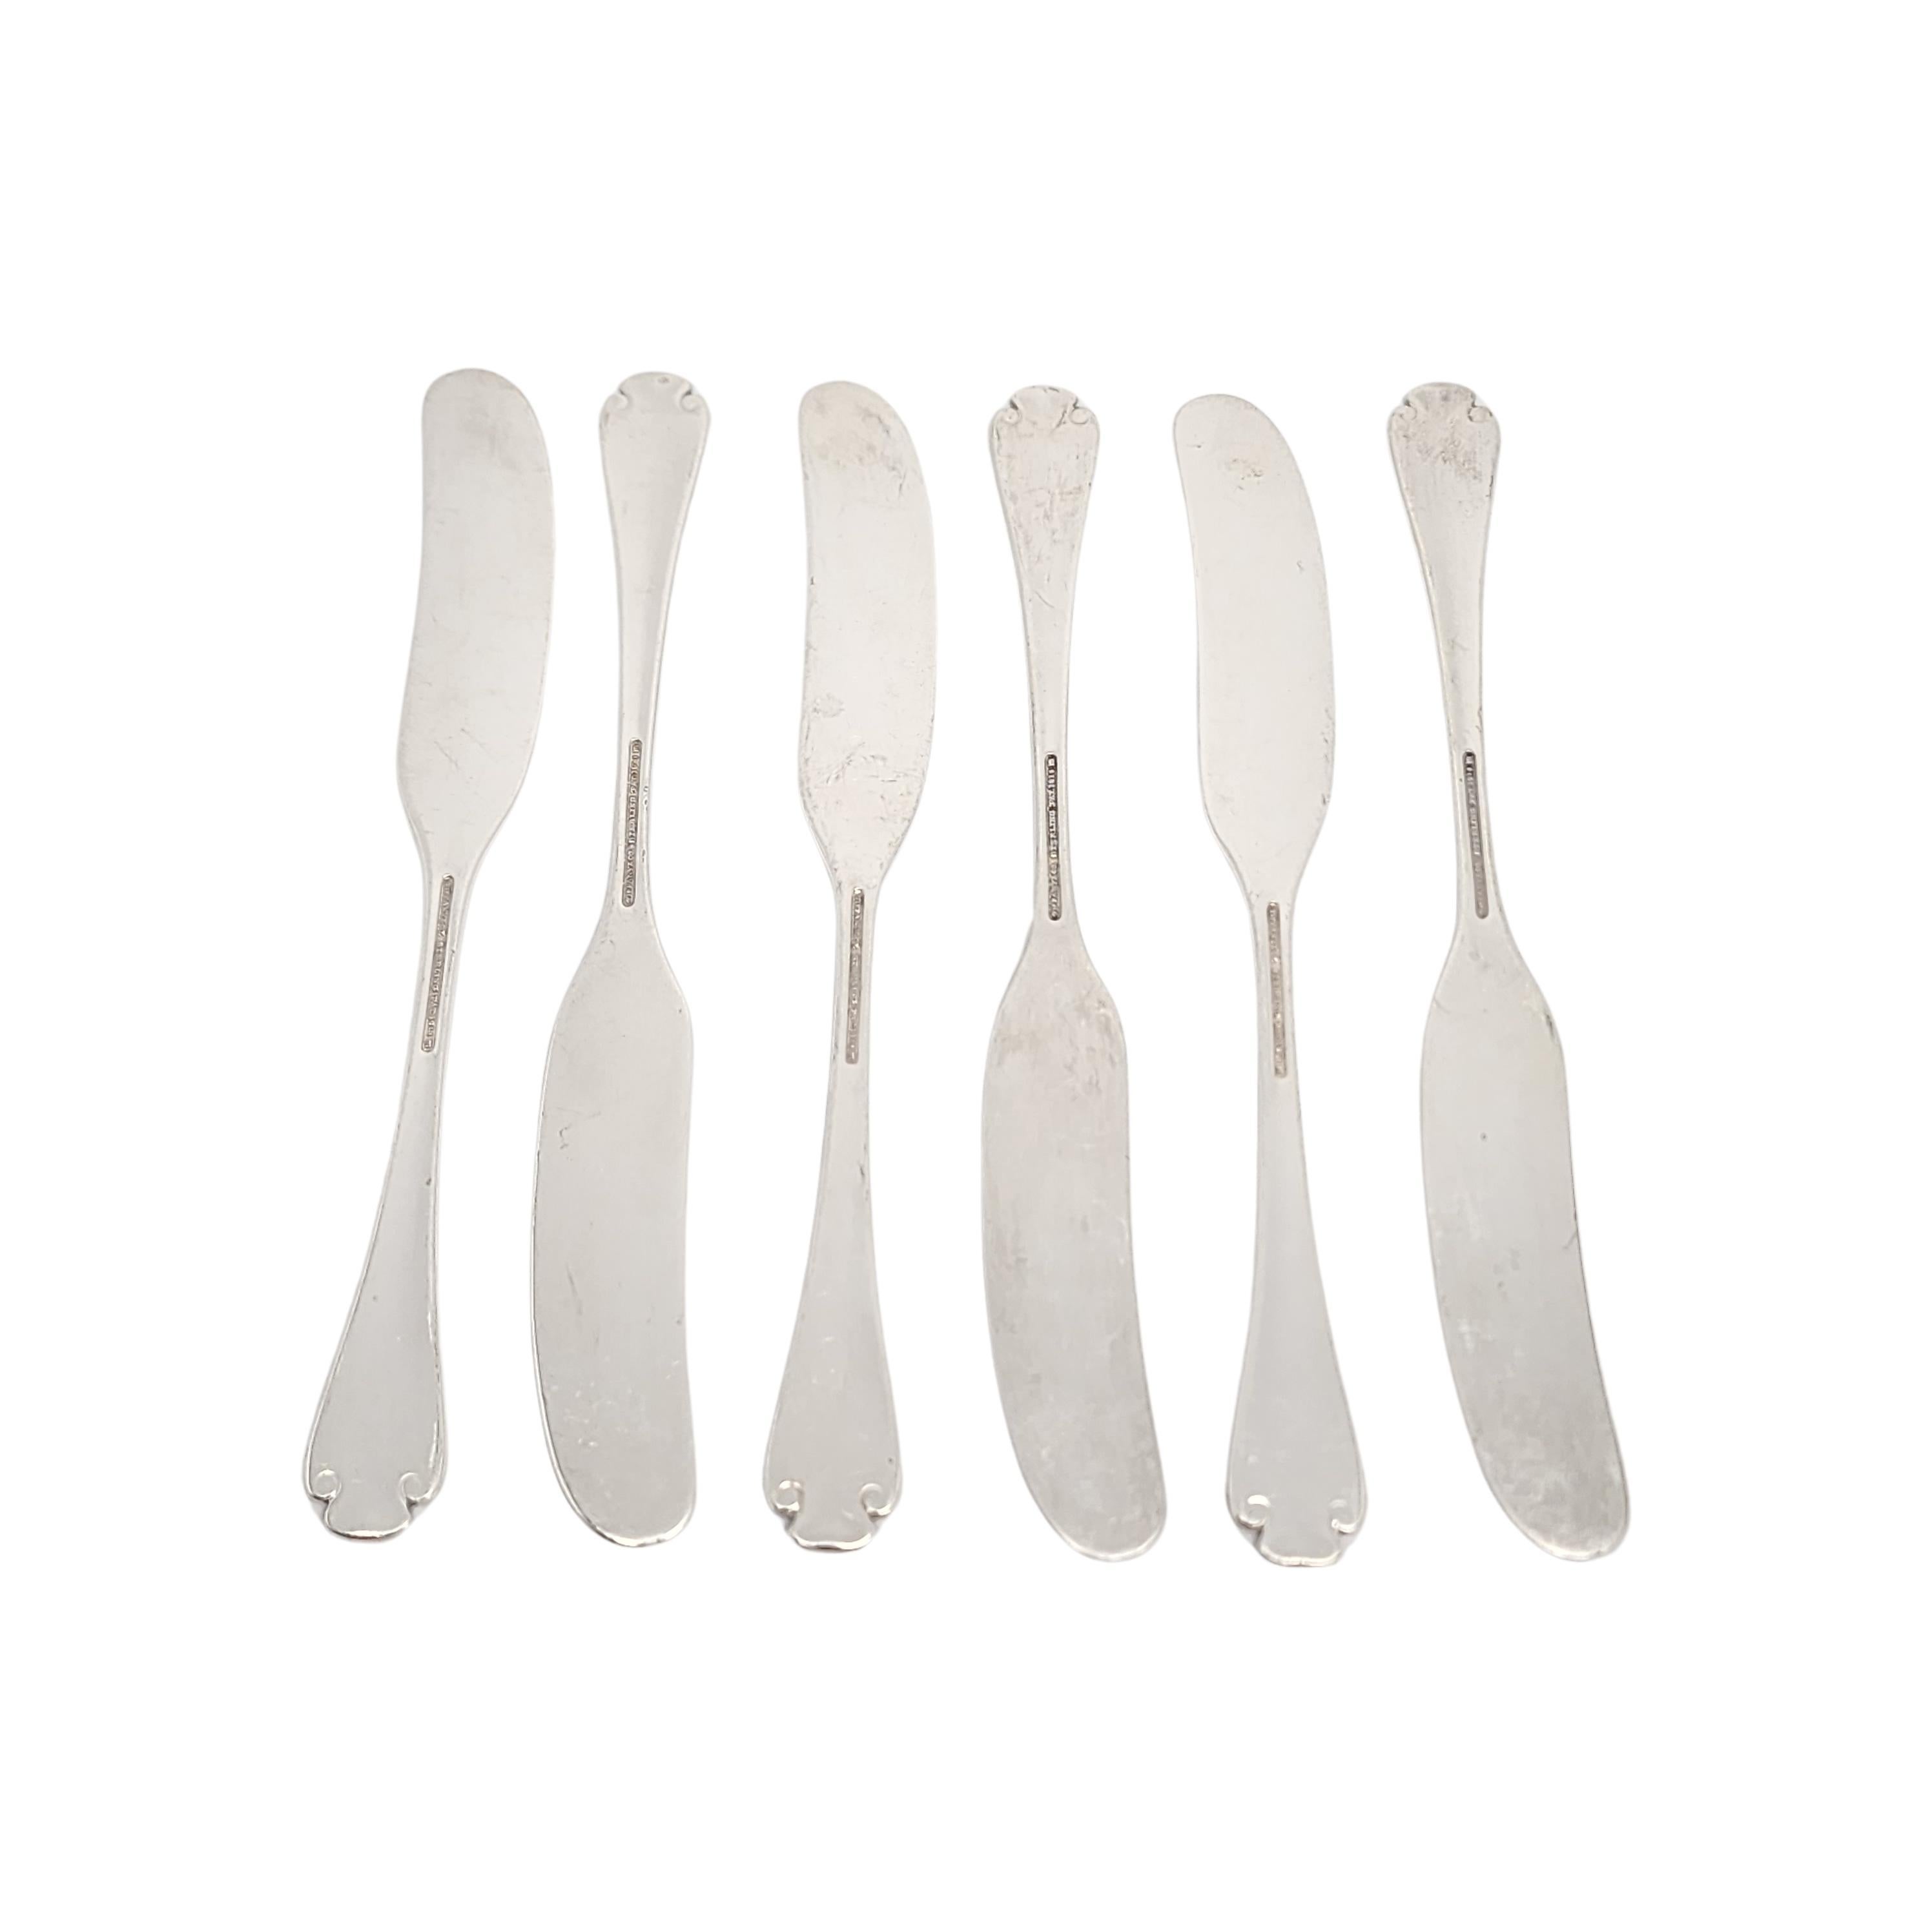 Set of 6 sterling silver flat handle butter spreaders by Tiffany & Co in the Flemish pattern.

No monogram.

The Flemish pattern features a simple and elegant scroll design, making it a timeless classic that is still in demand today. Hallmarks date